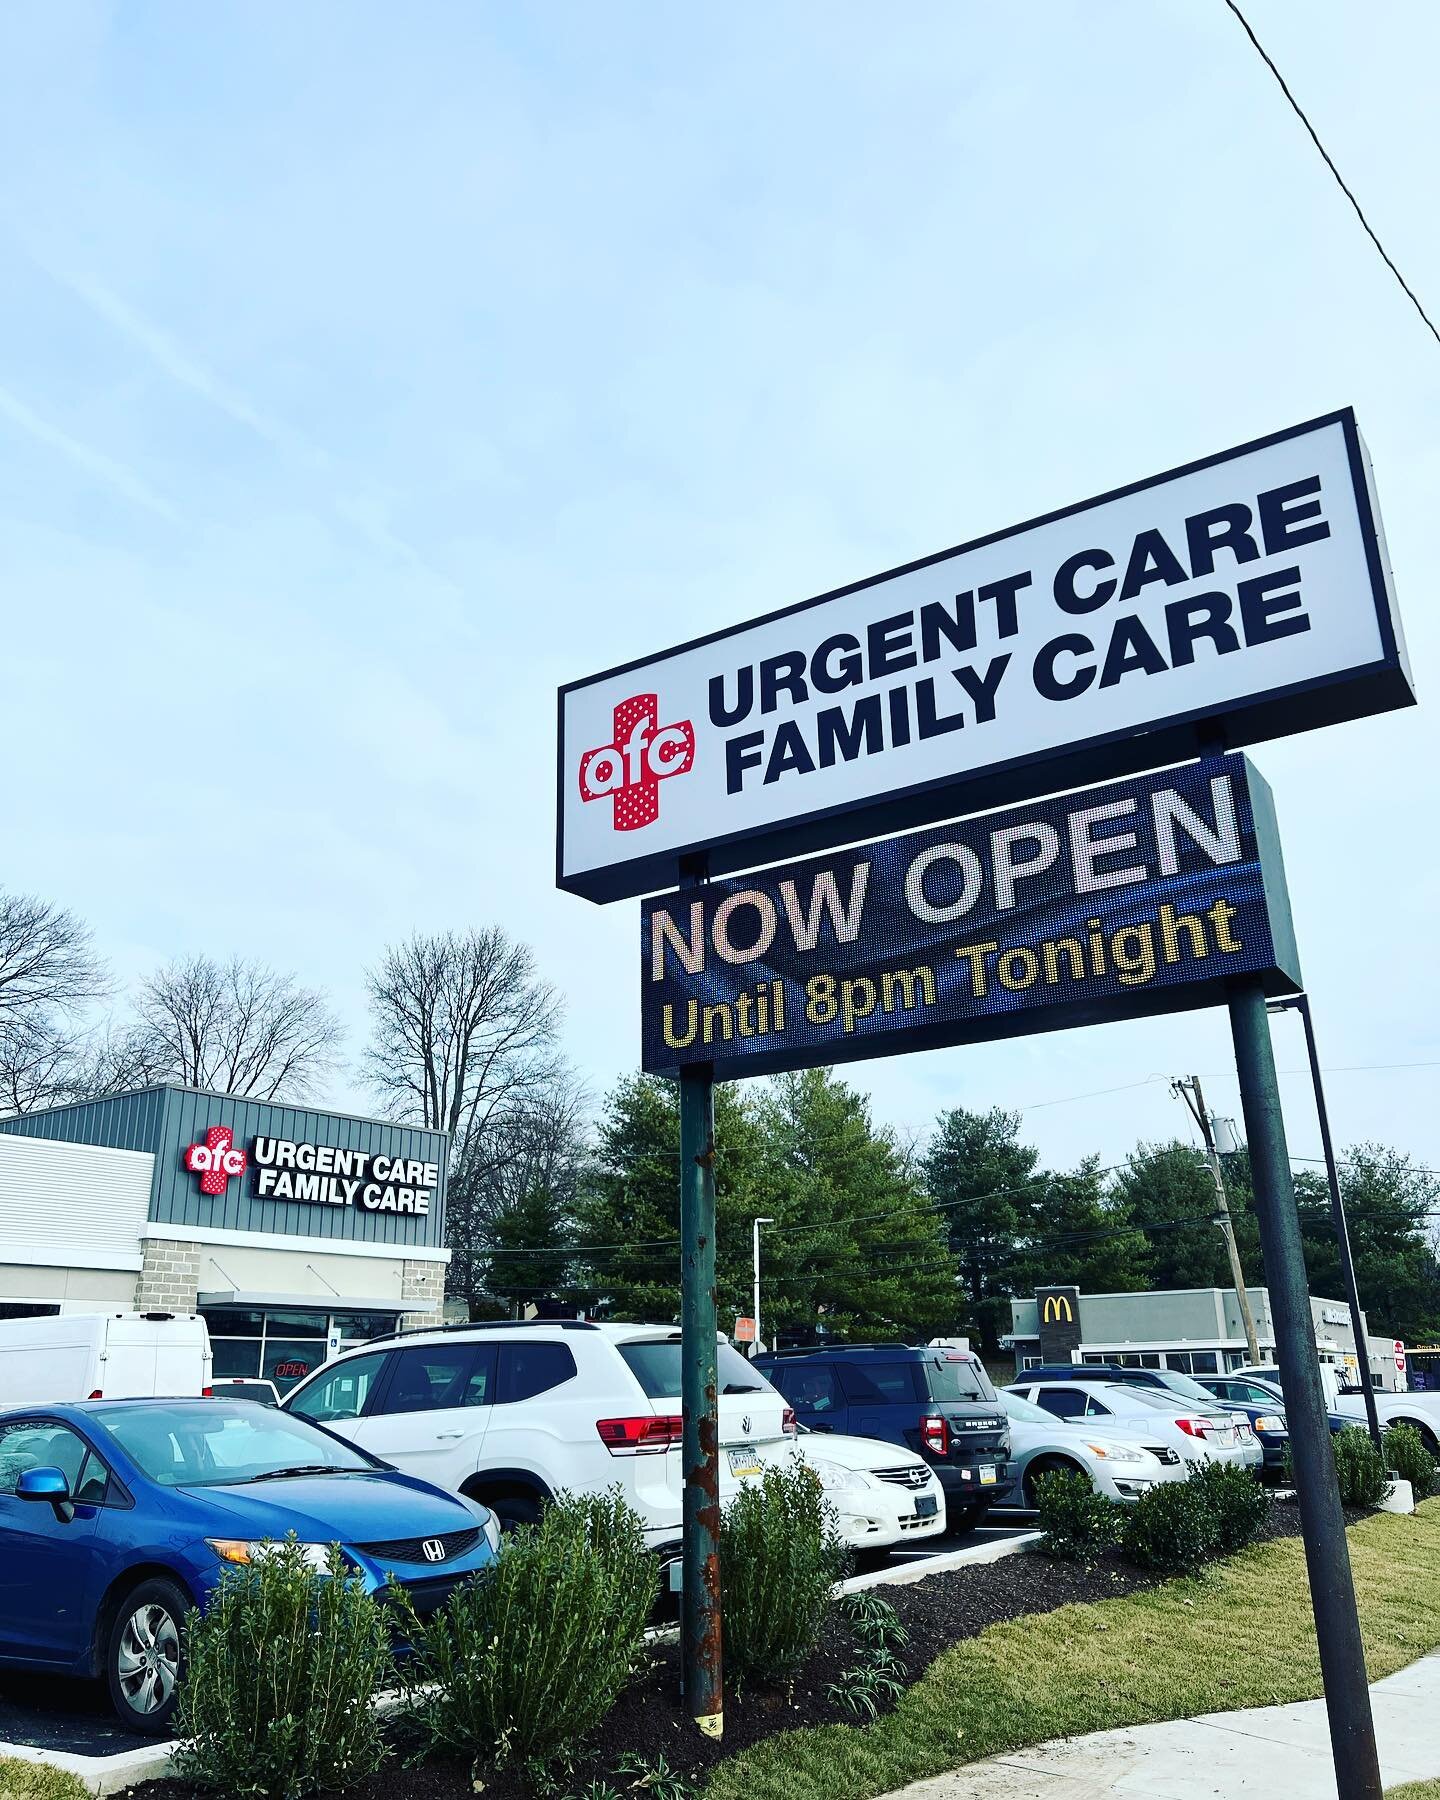 American Family Care (Holmes, PA), NOW OPEN. Our team is proud to provide another premier urgent care facility to our area. Great work to everyone involved!
#buildforourfuture #camfredconstruction #medicalfitout #projectcomplete